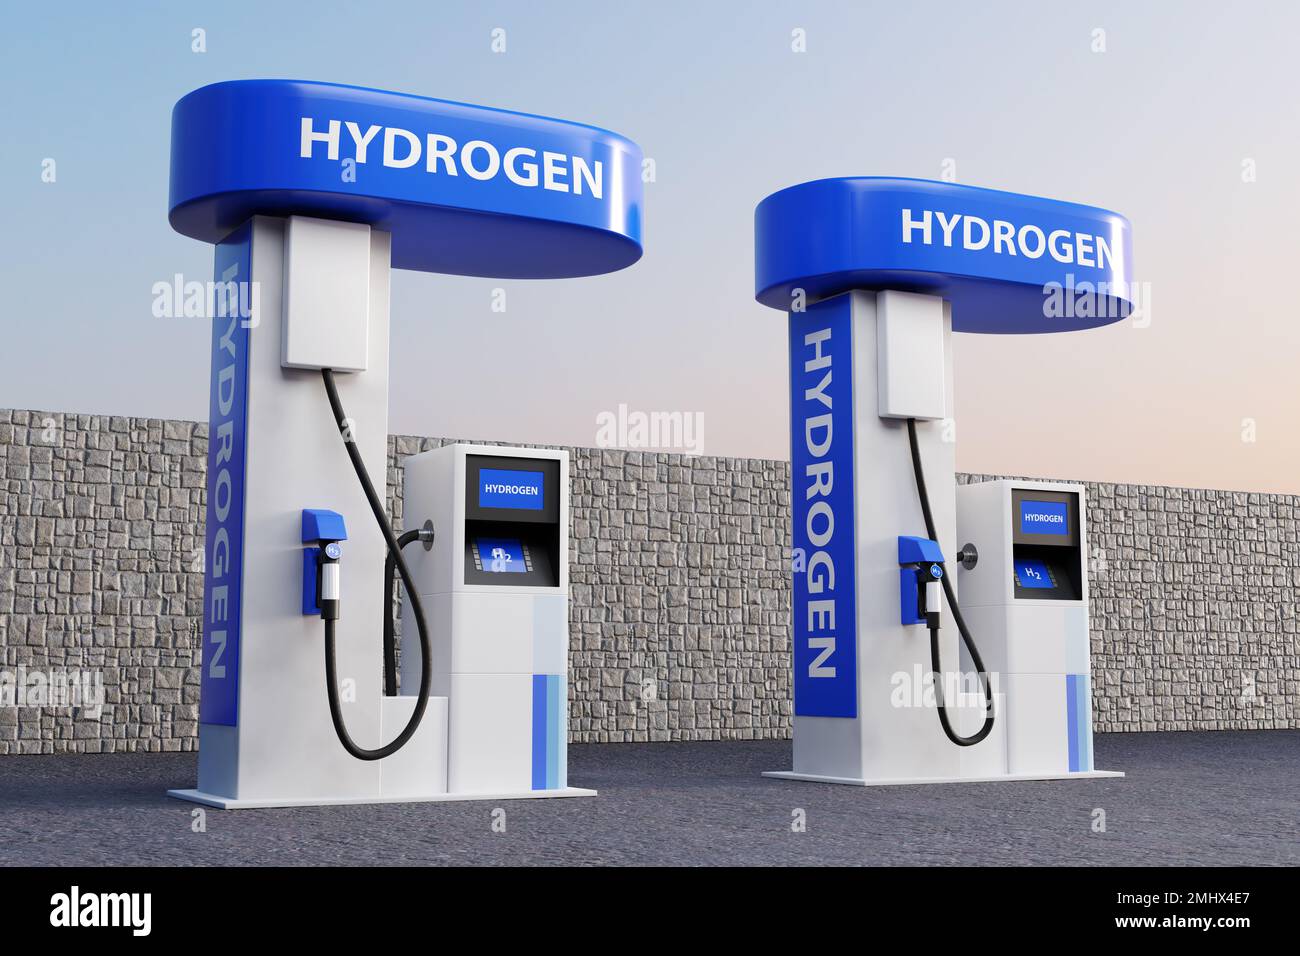 Hydrogen refueling station with dispensers for H2 vehicles. The concept of fuel cell electric vehicles and hydrogen powered transportation Stock Photo